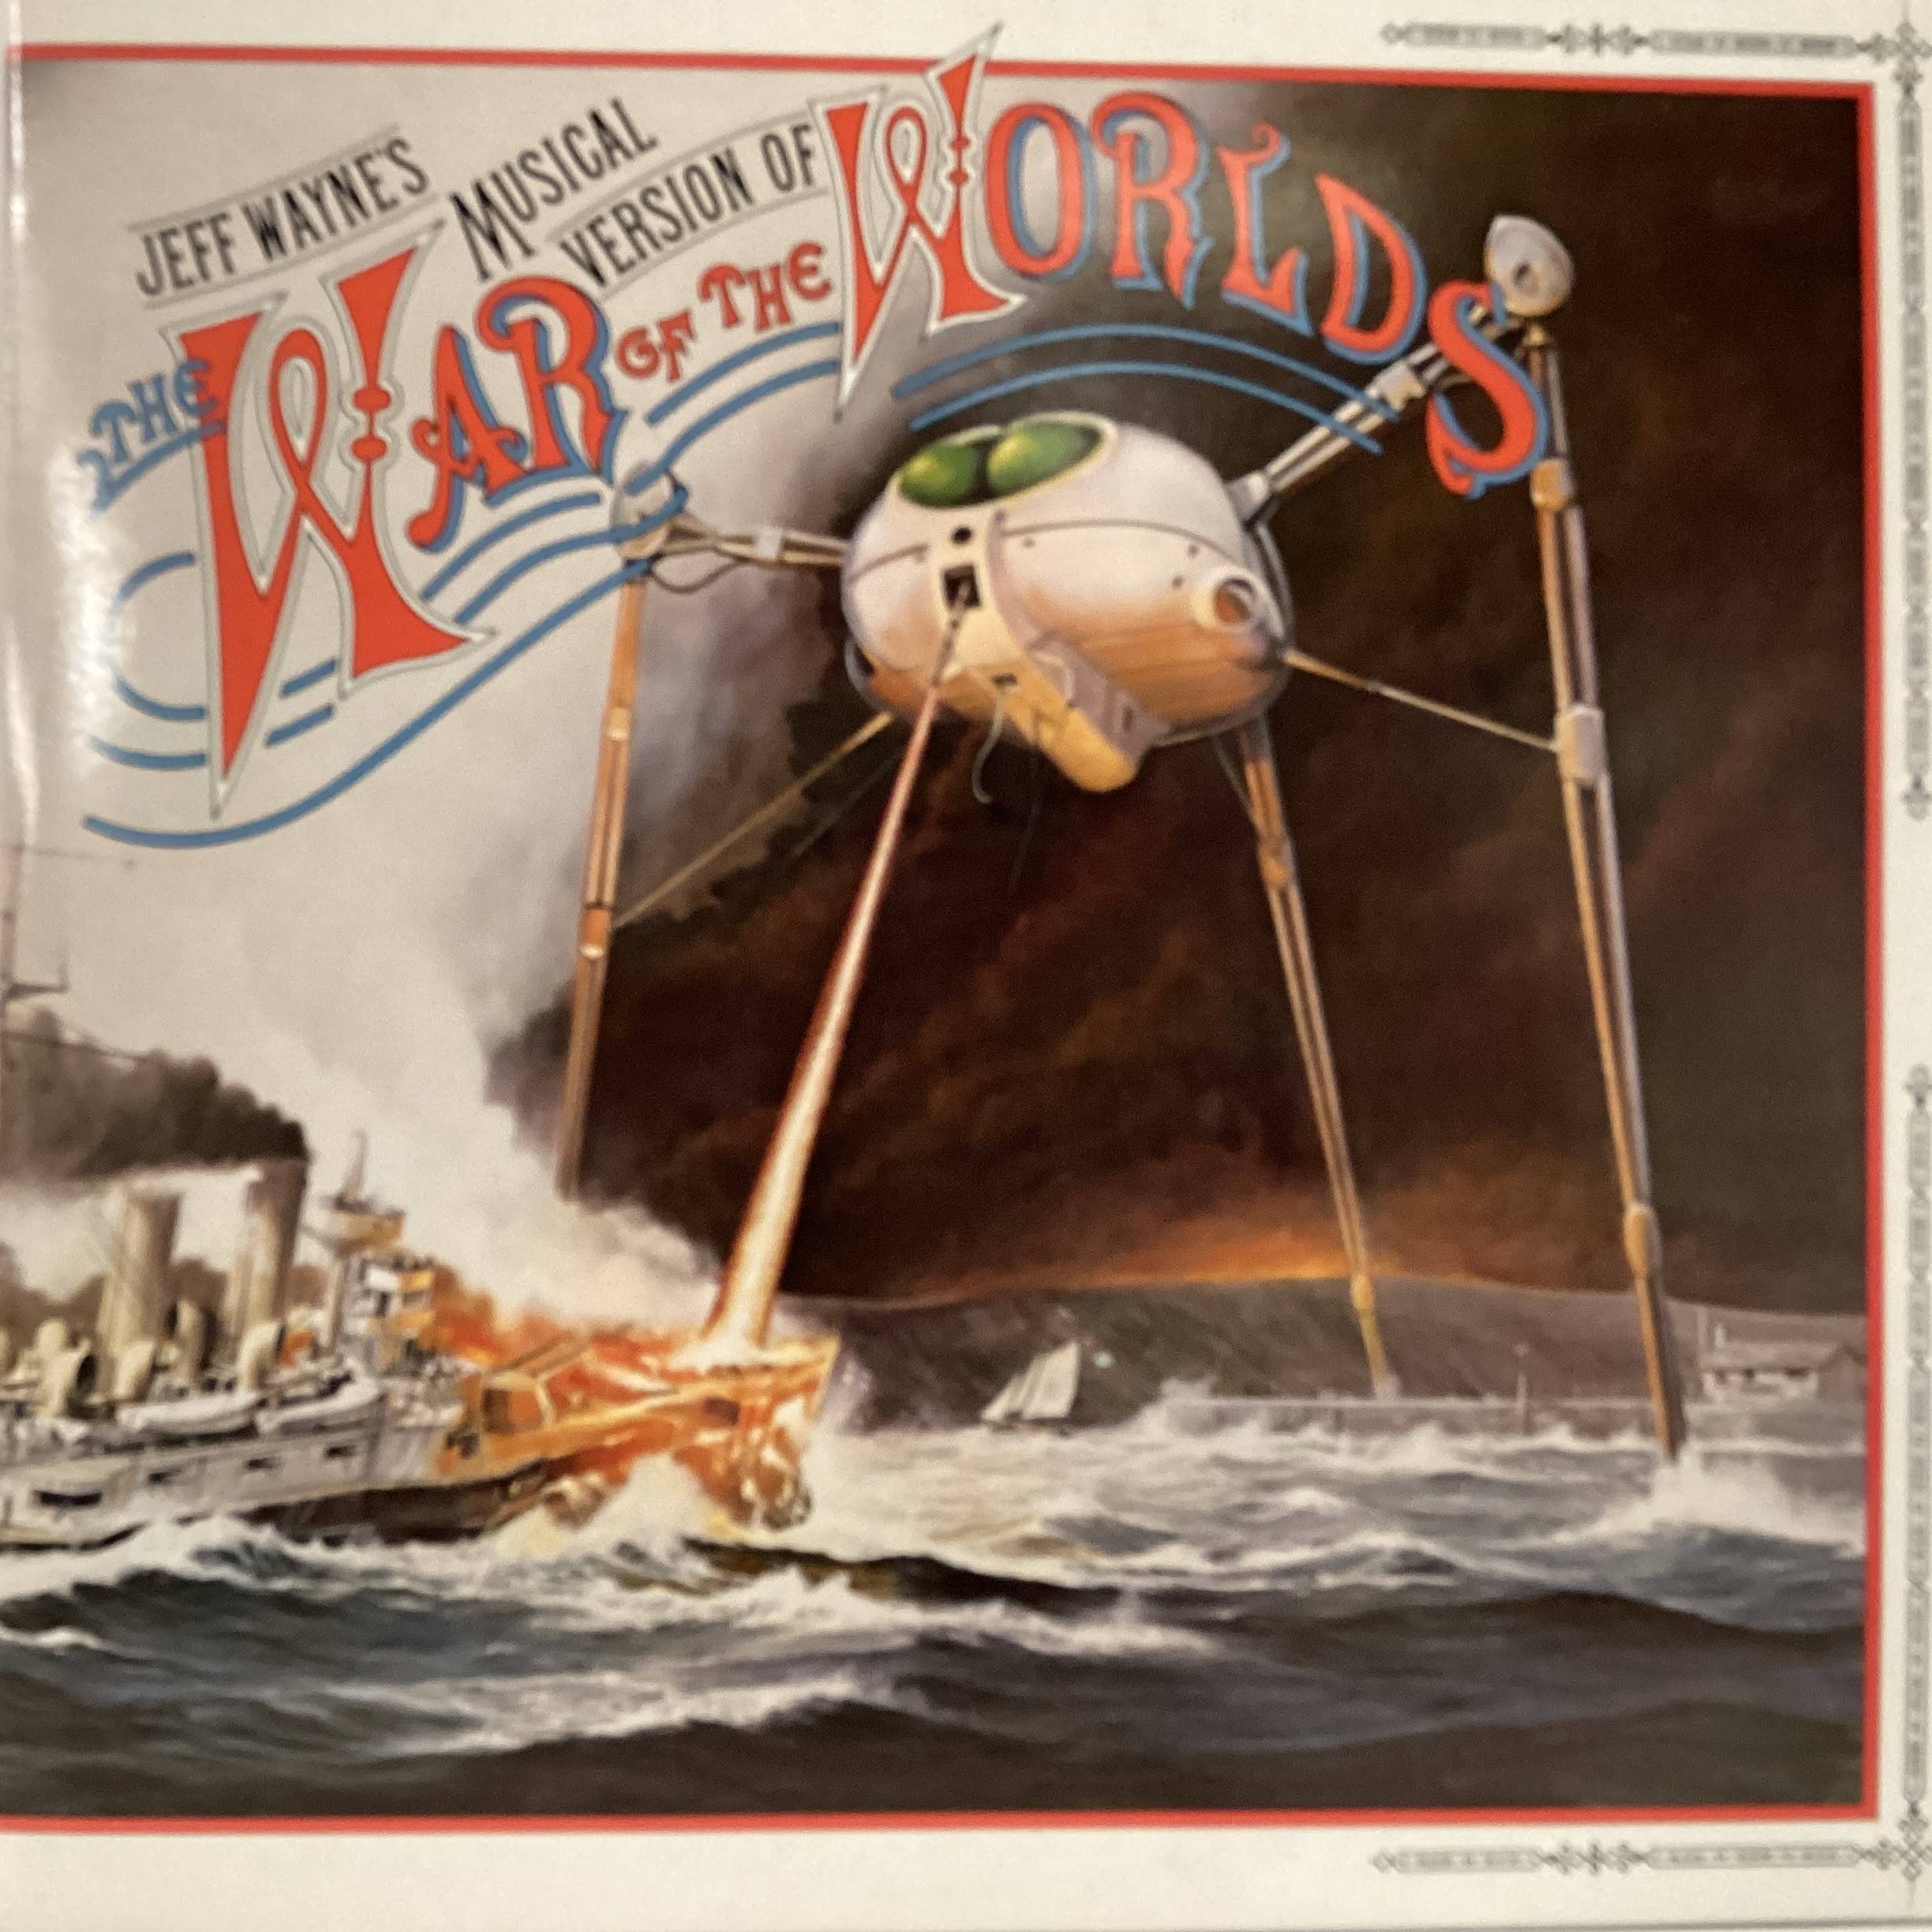 WAR OF THE WORLDS SOUNDTRACK VINYL DOUBLE ALBUM. A fantastic copy of this Jeff Wayne’s Musical on